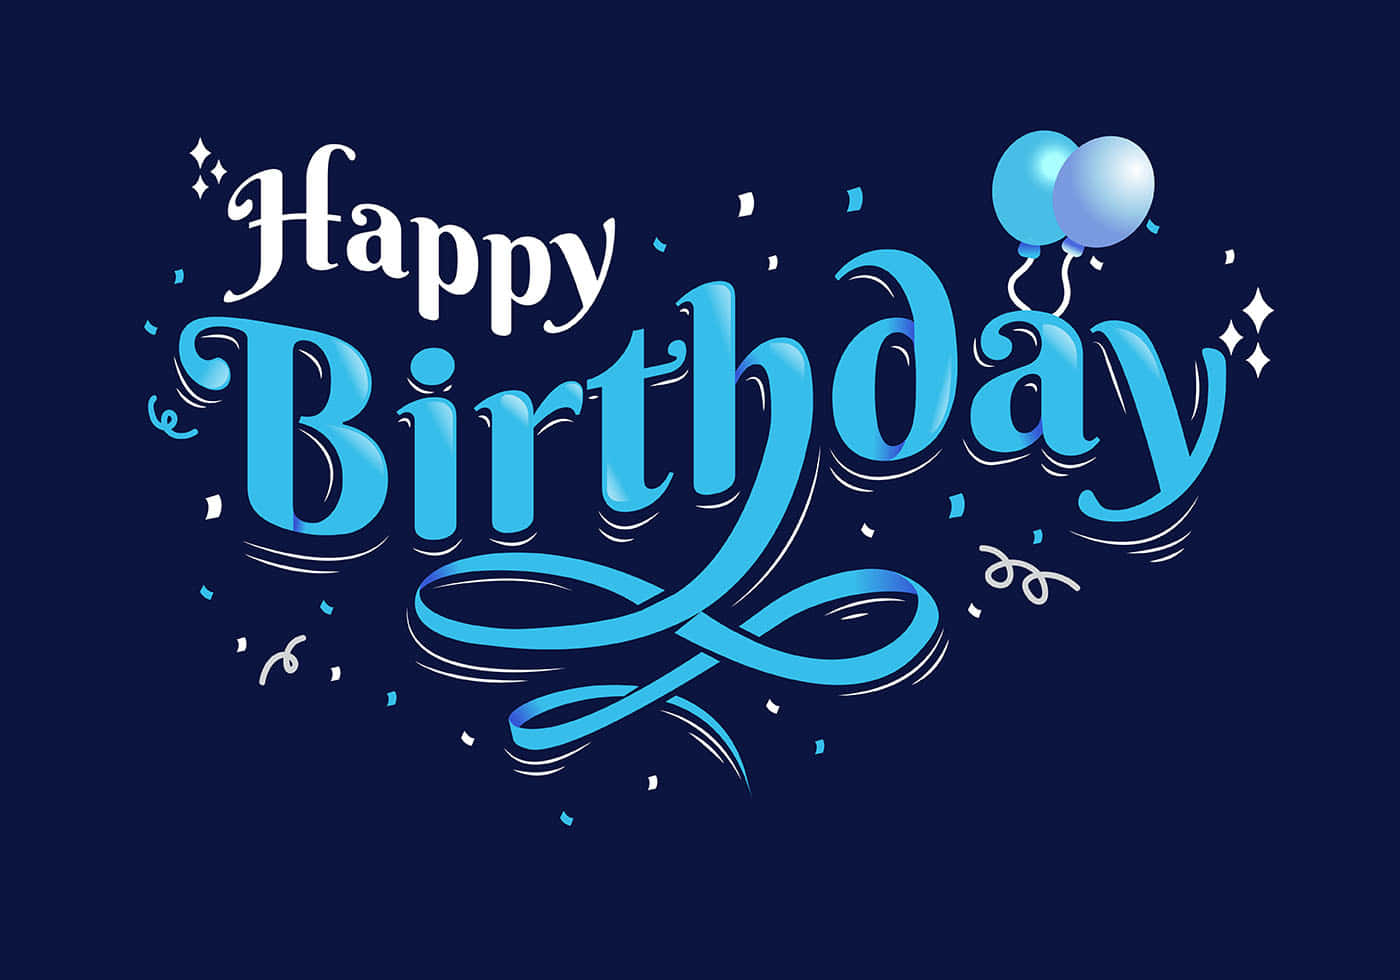 30 New and exclusive HD Birthday wishes Images - Happy Birthday to you! -  Happy Birthday wishes!